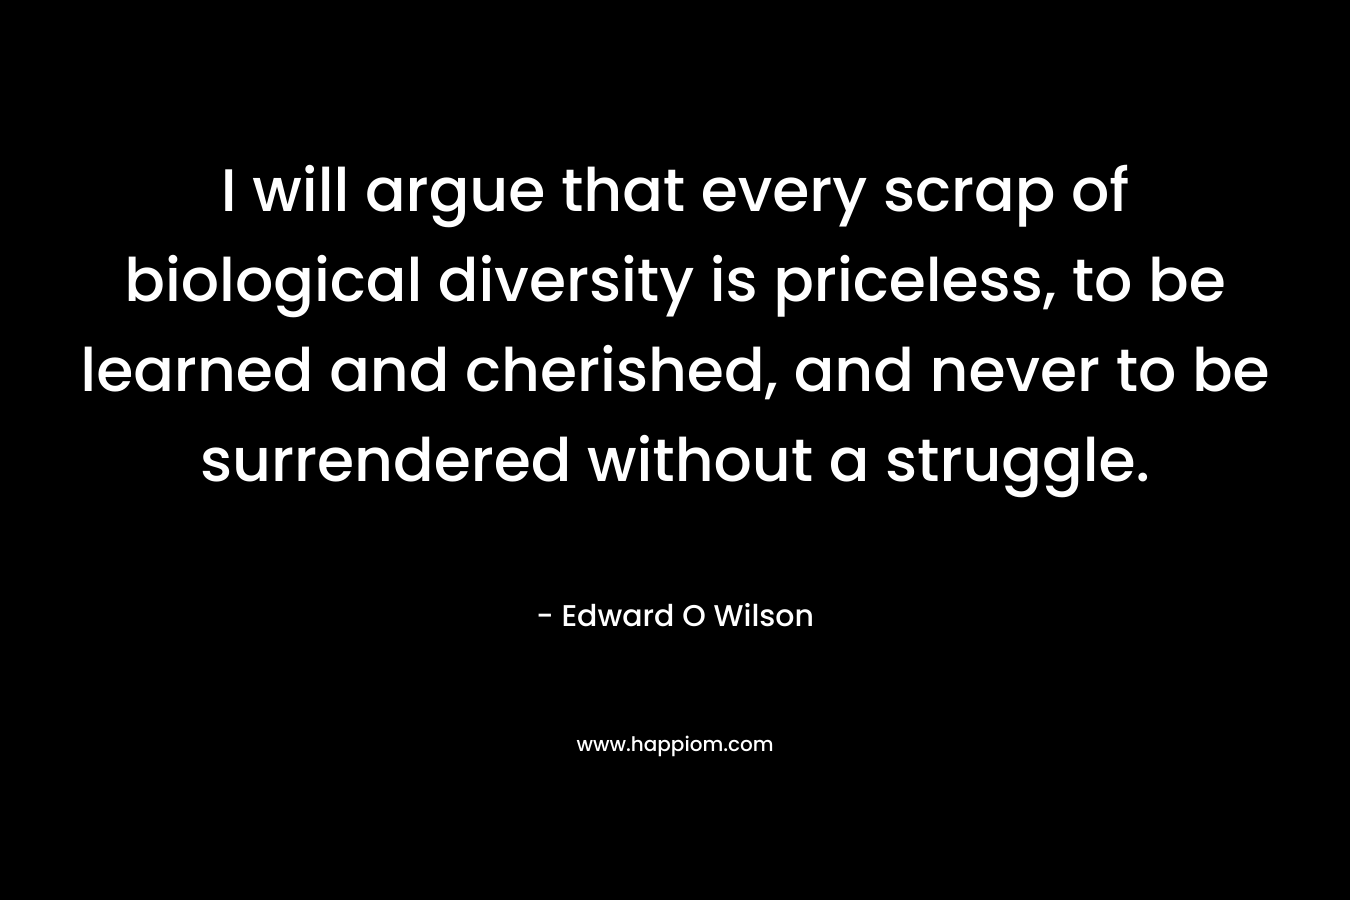 I will argue that every scrap of biological diversity is priceless, to be learned and cherished, and never to be surrendered without a struggle.